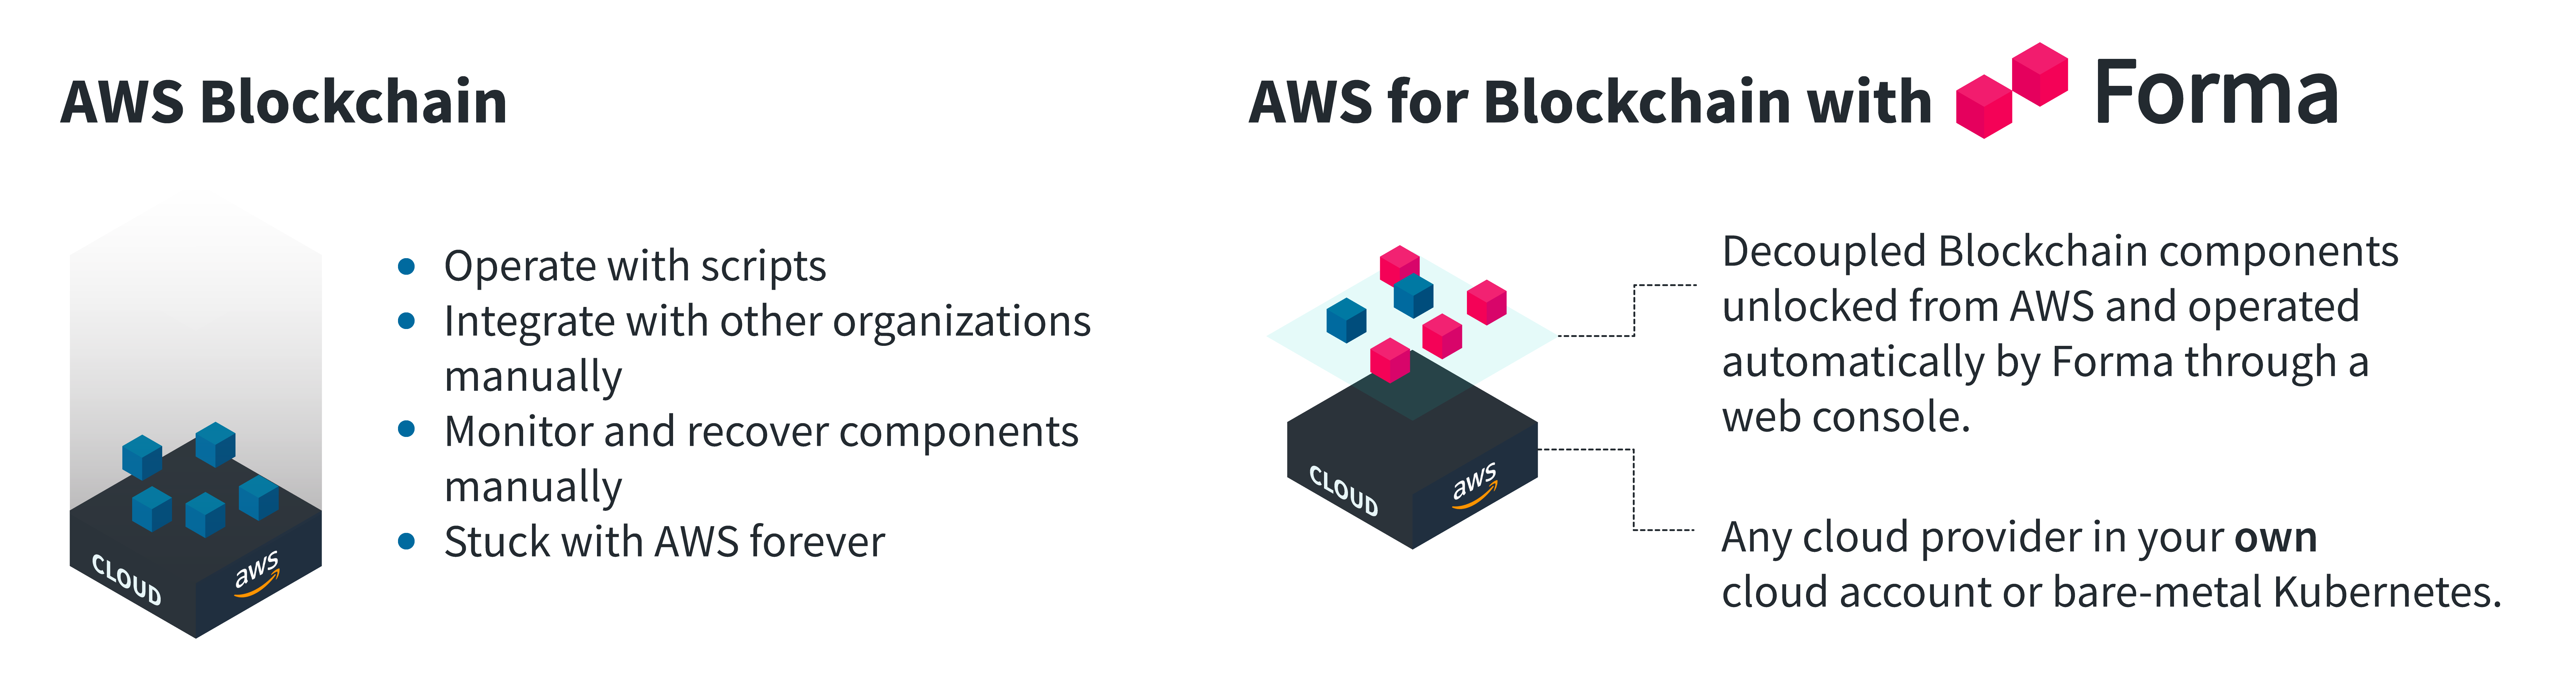 AWS Blockchain versus AWS for Blockchain | by Covalent ...